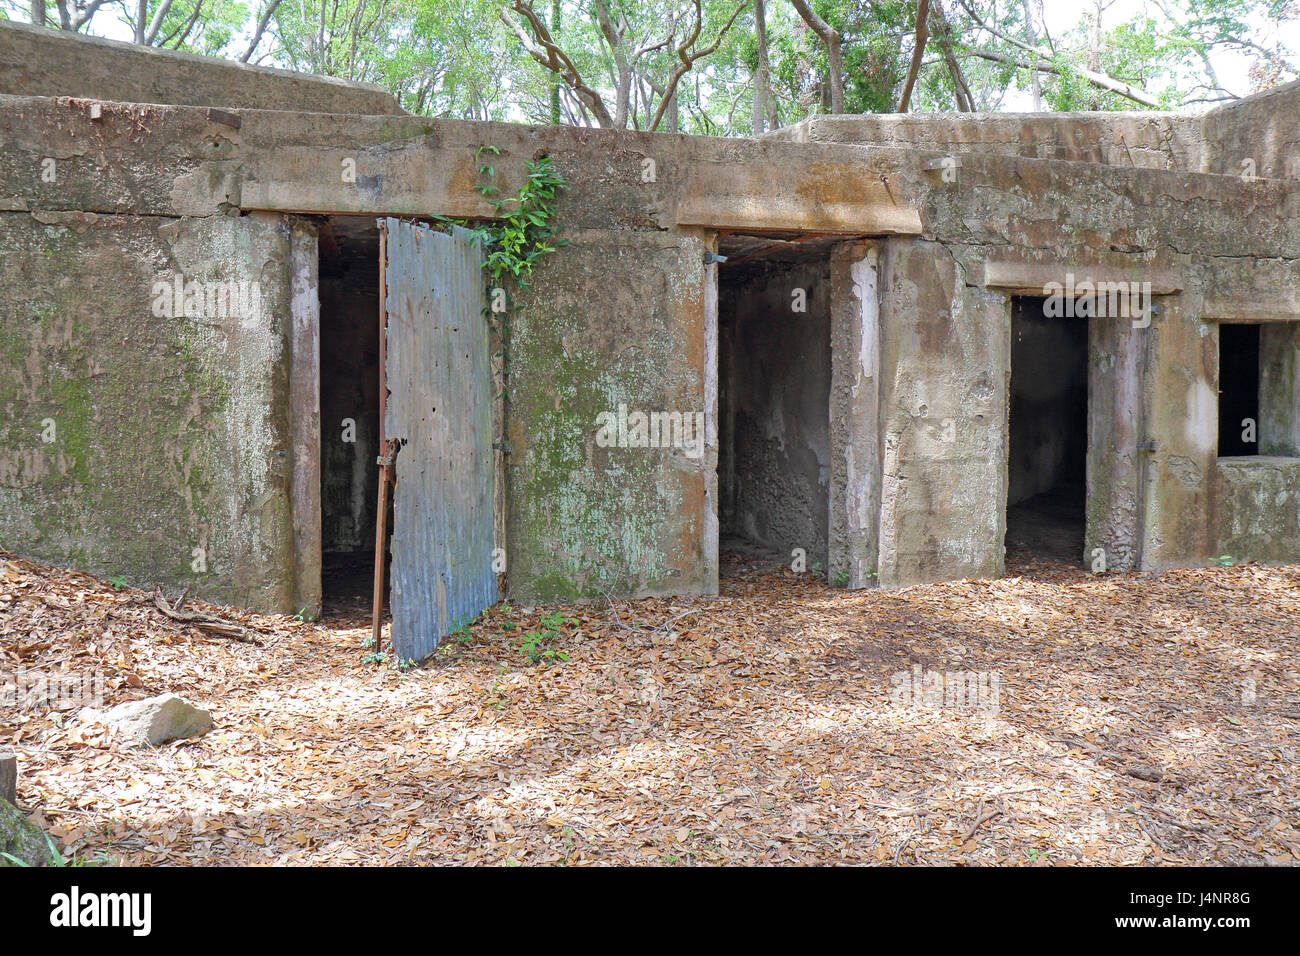 Concrete ruins of the gun battery at Fort Fremont, constructed during the Spanish-American war beginning in 1899, on Saint Helena Island in Beaufort C Stock Photo